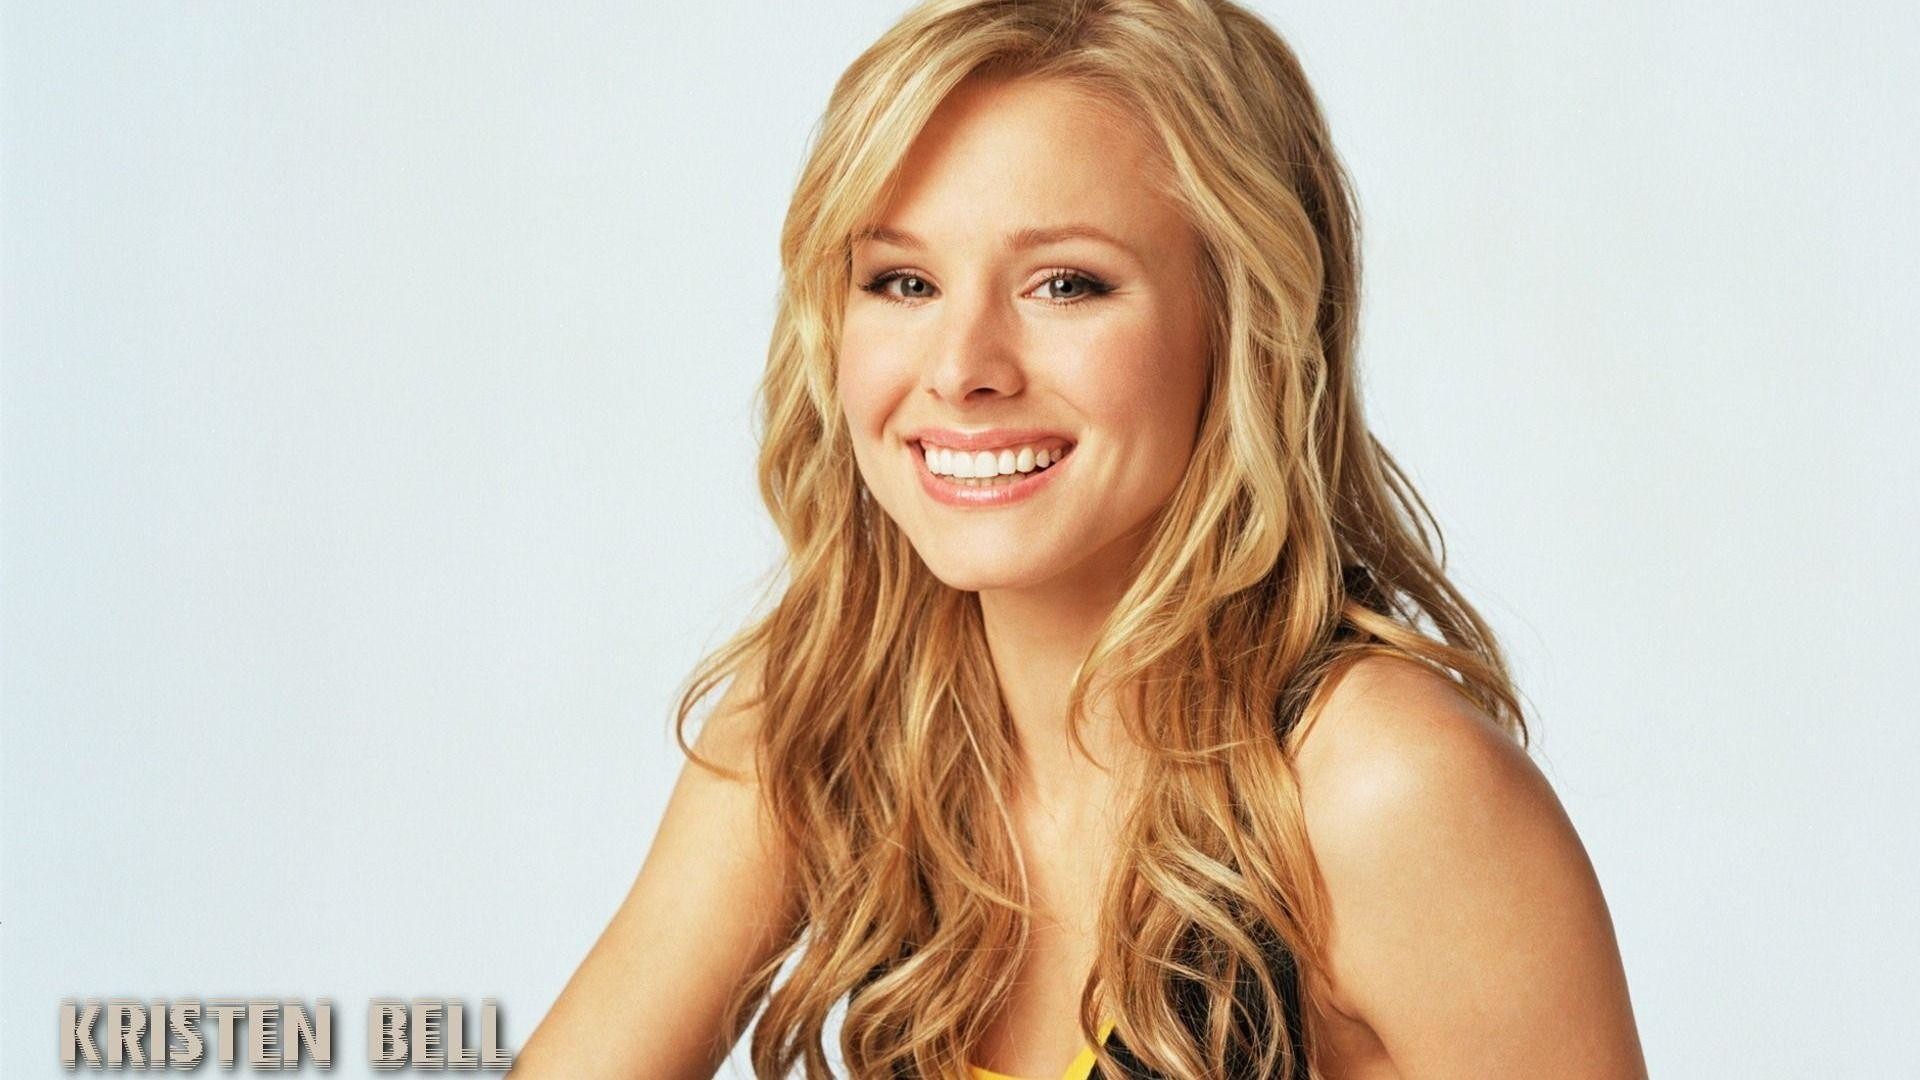 1920x1080 New Kristen Bell Pictures Full Hd Wallpapers Celebrities Picture .